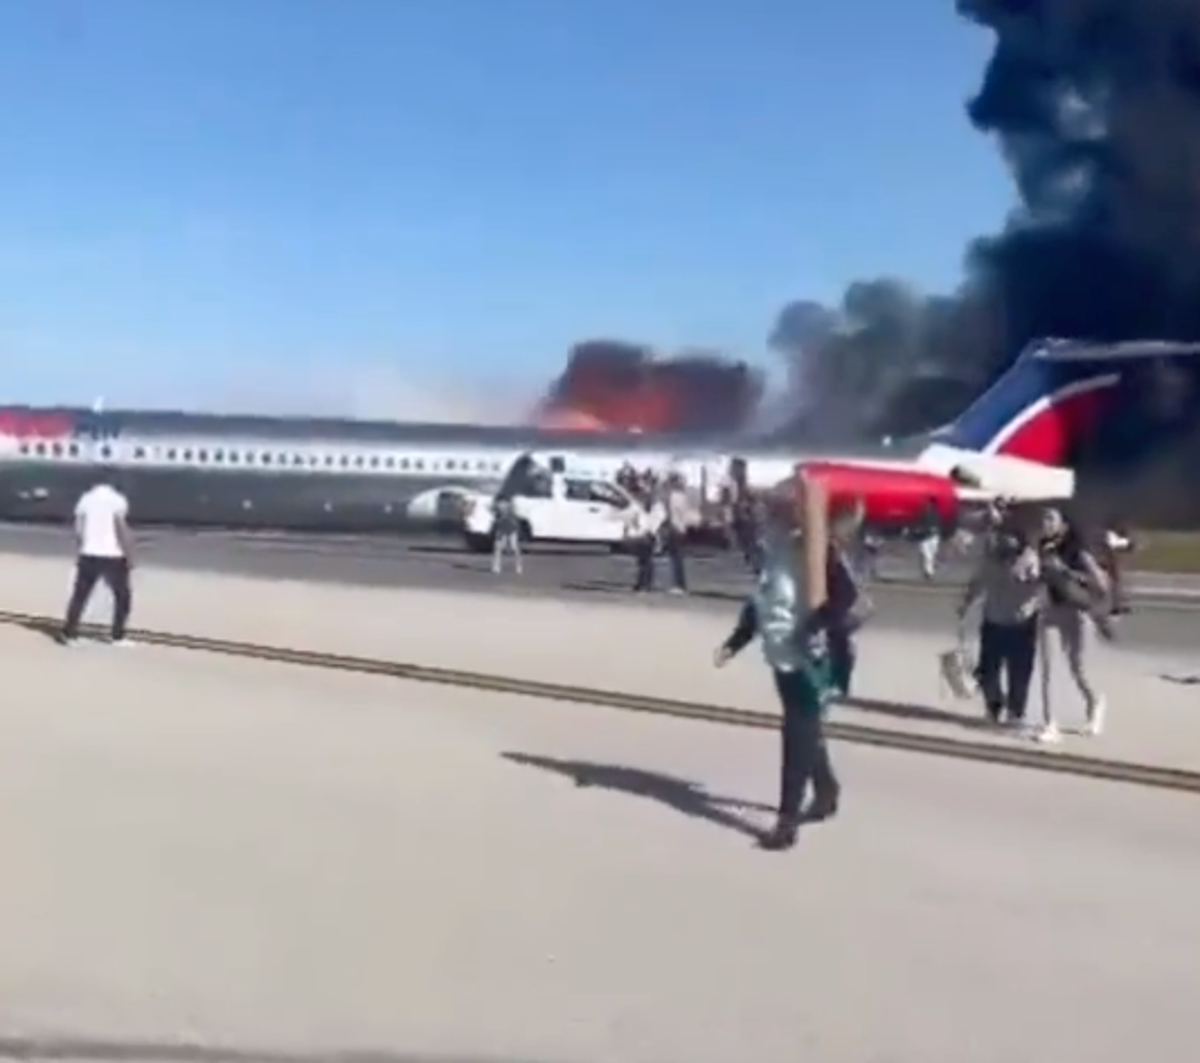 What is Red Air, the Dominican airline whose plane crash landed in Miami? 